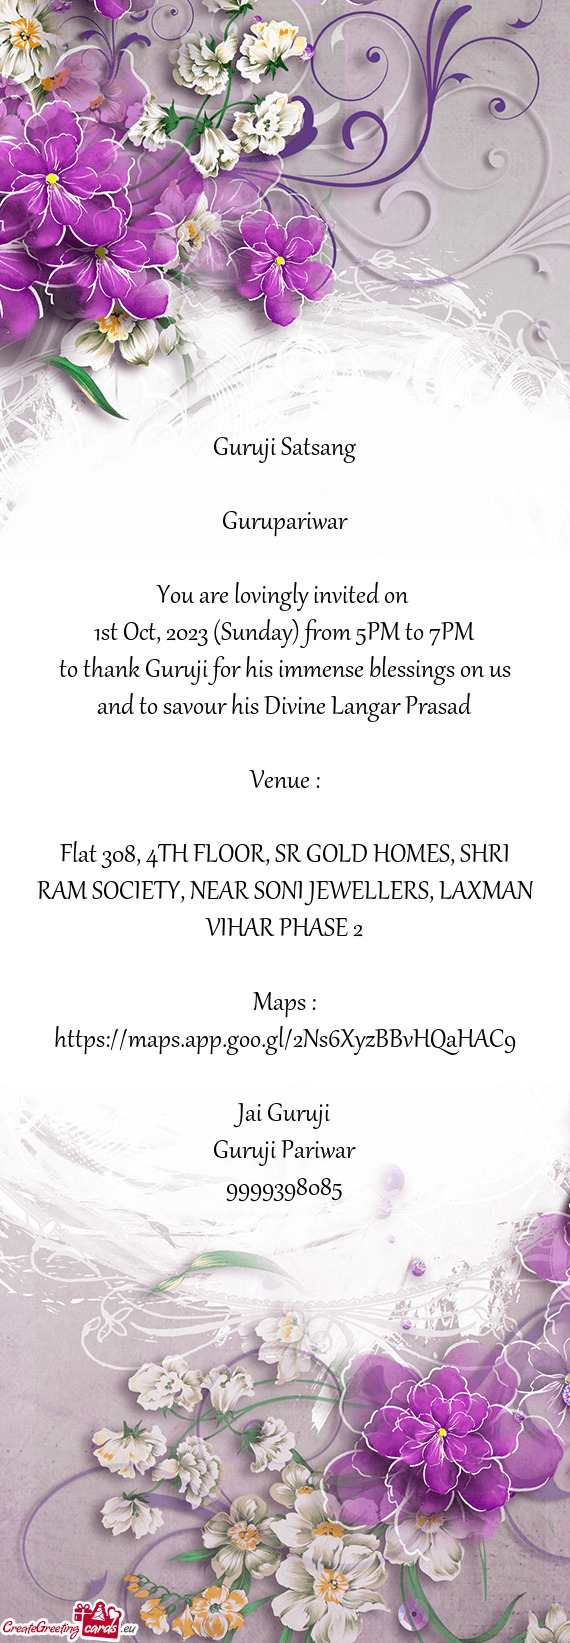 1st Oct, 2023 (Sunday) from 5PM to 7PM